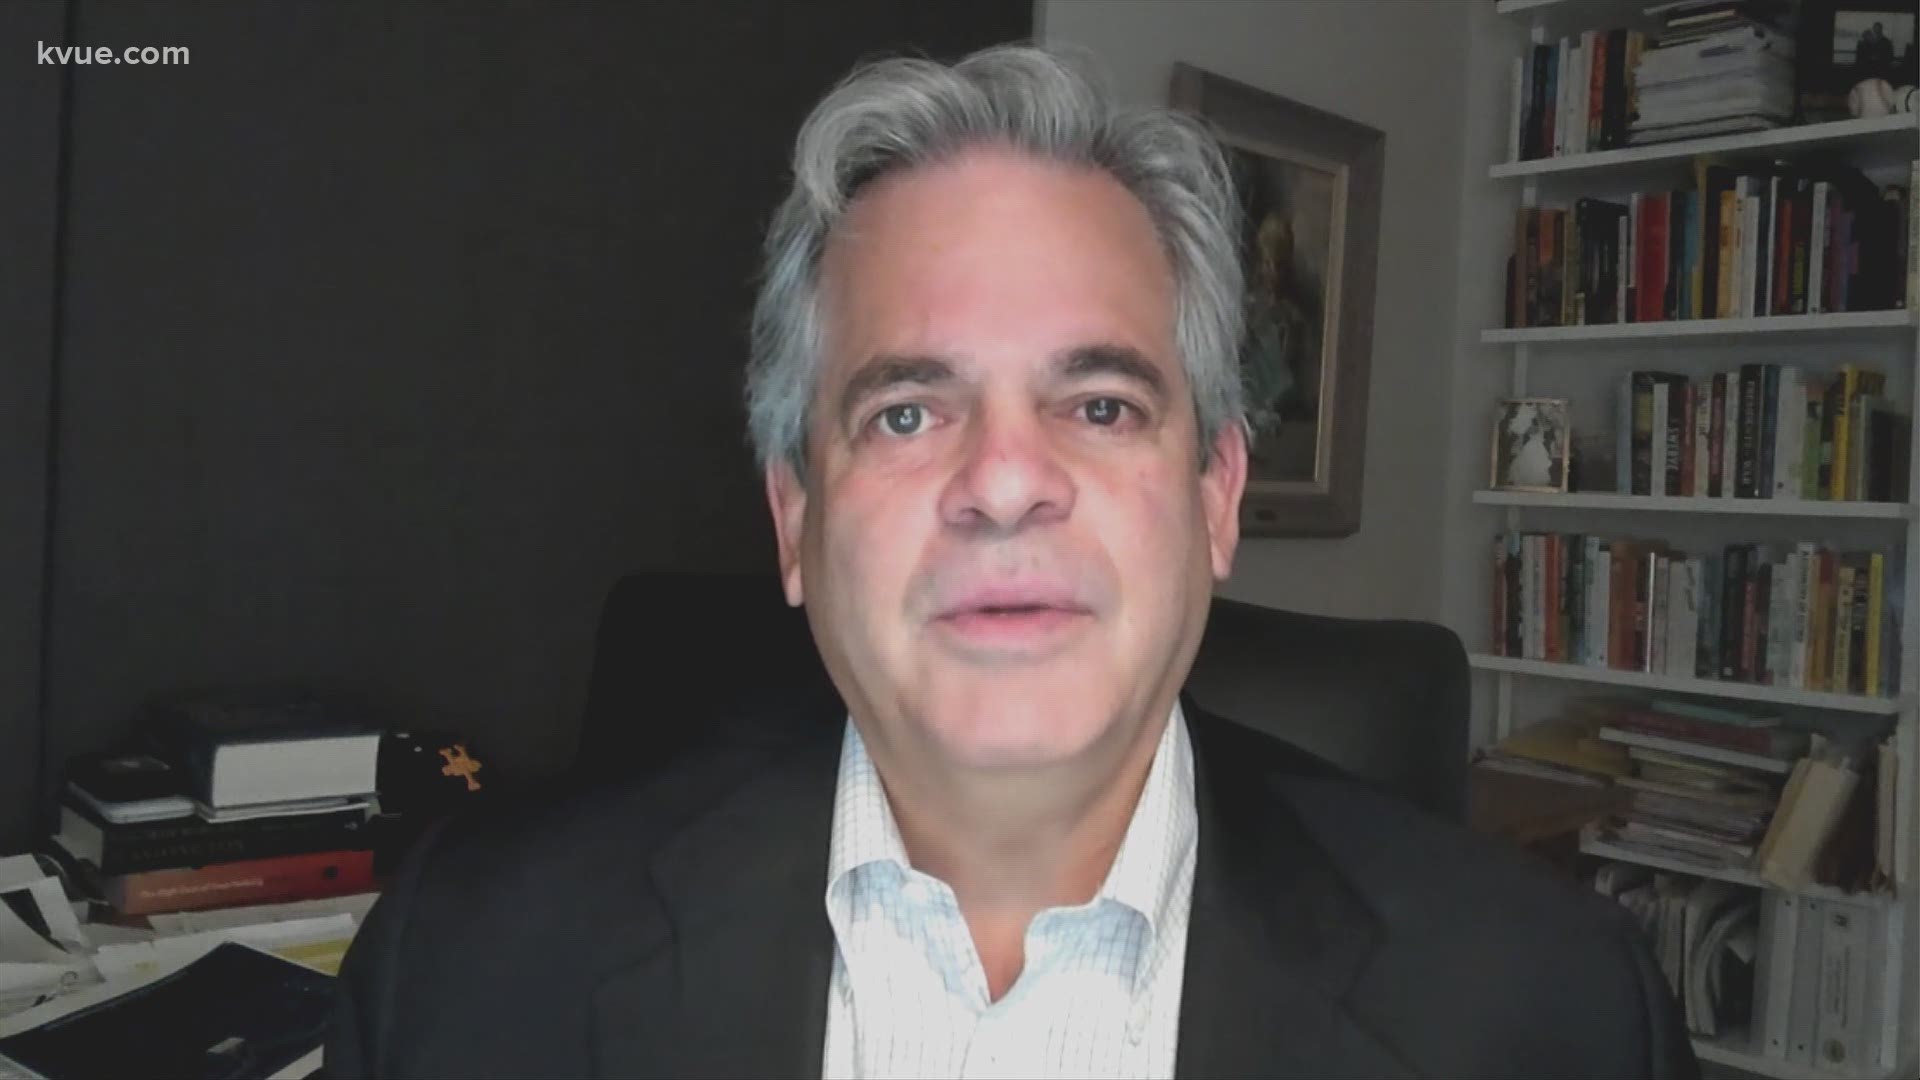 Mayor Steve Adler talked about COVID-19 as cases climb in Central Texas.